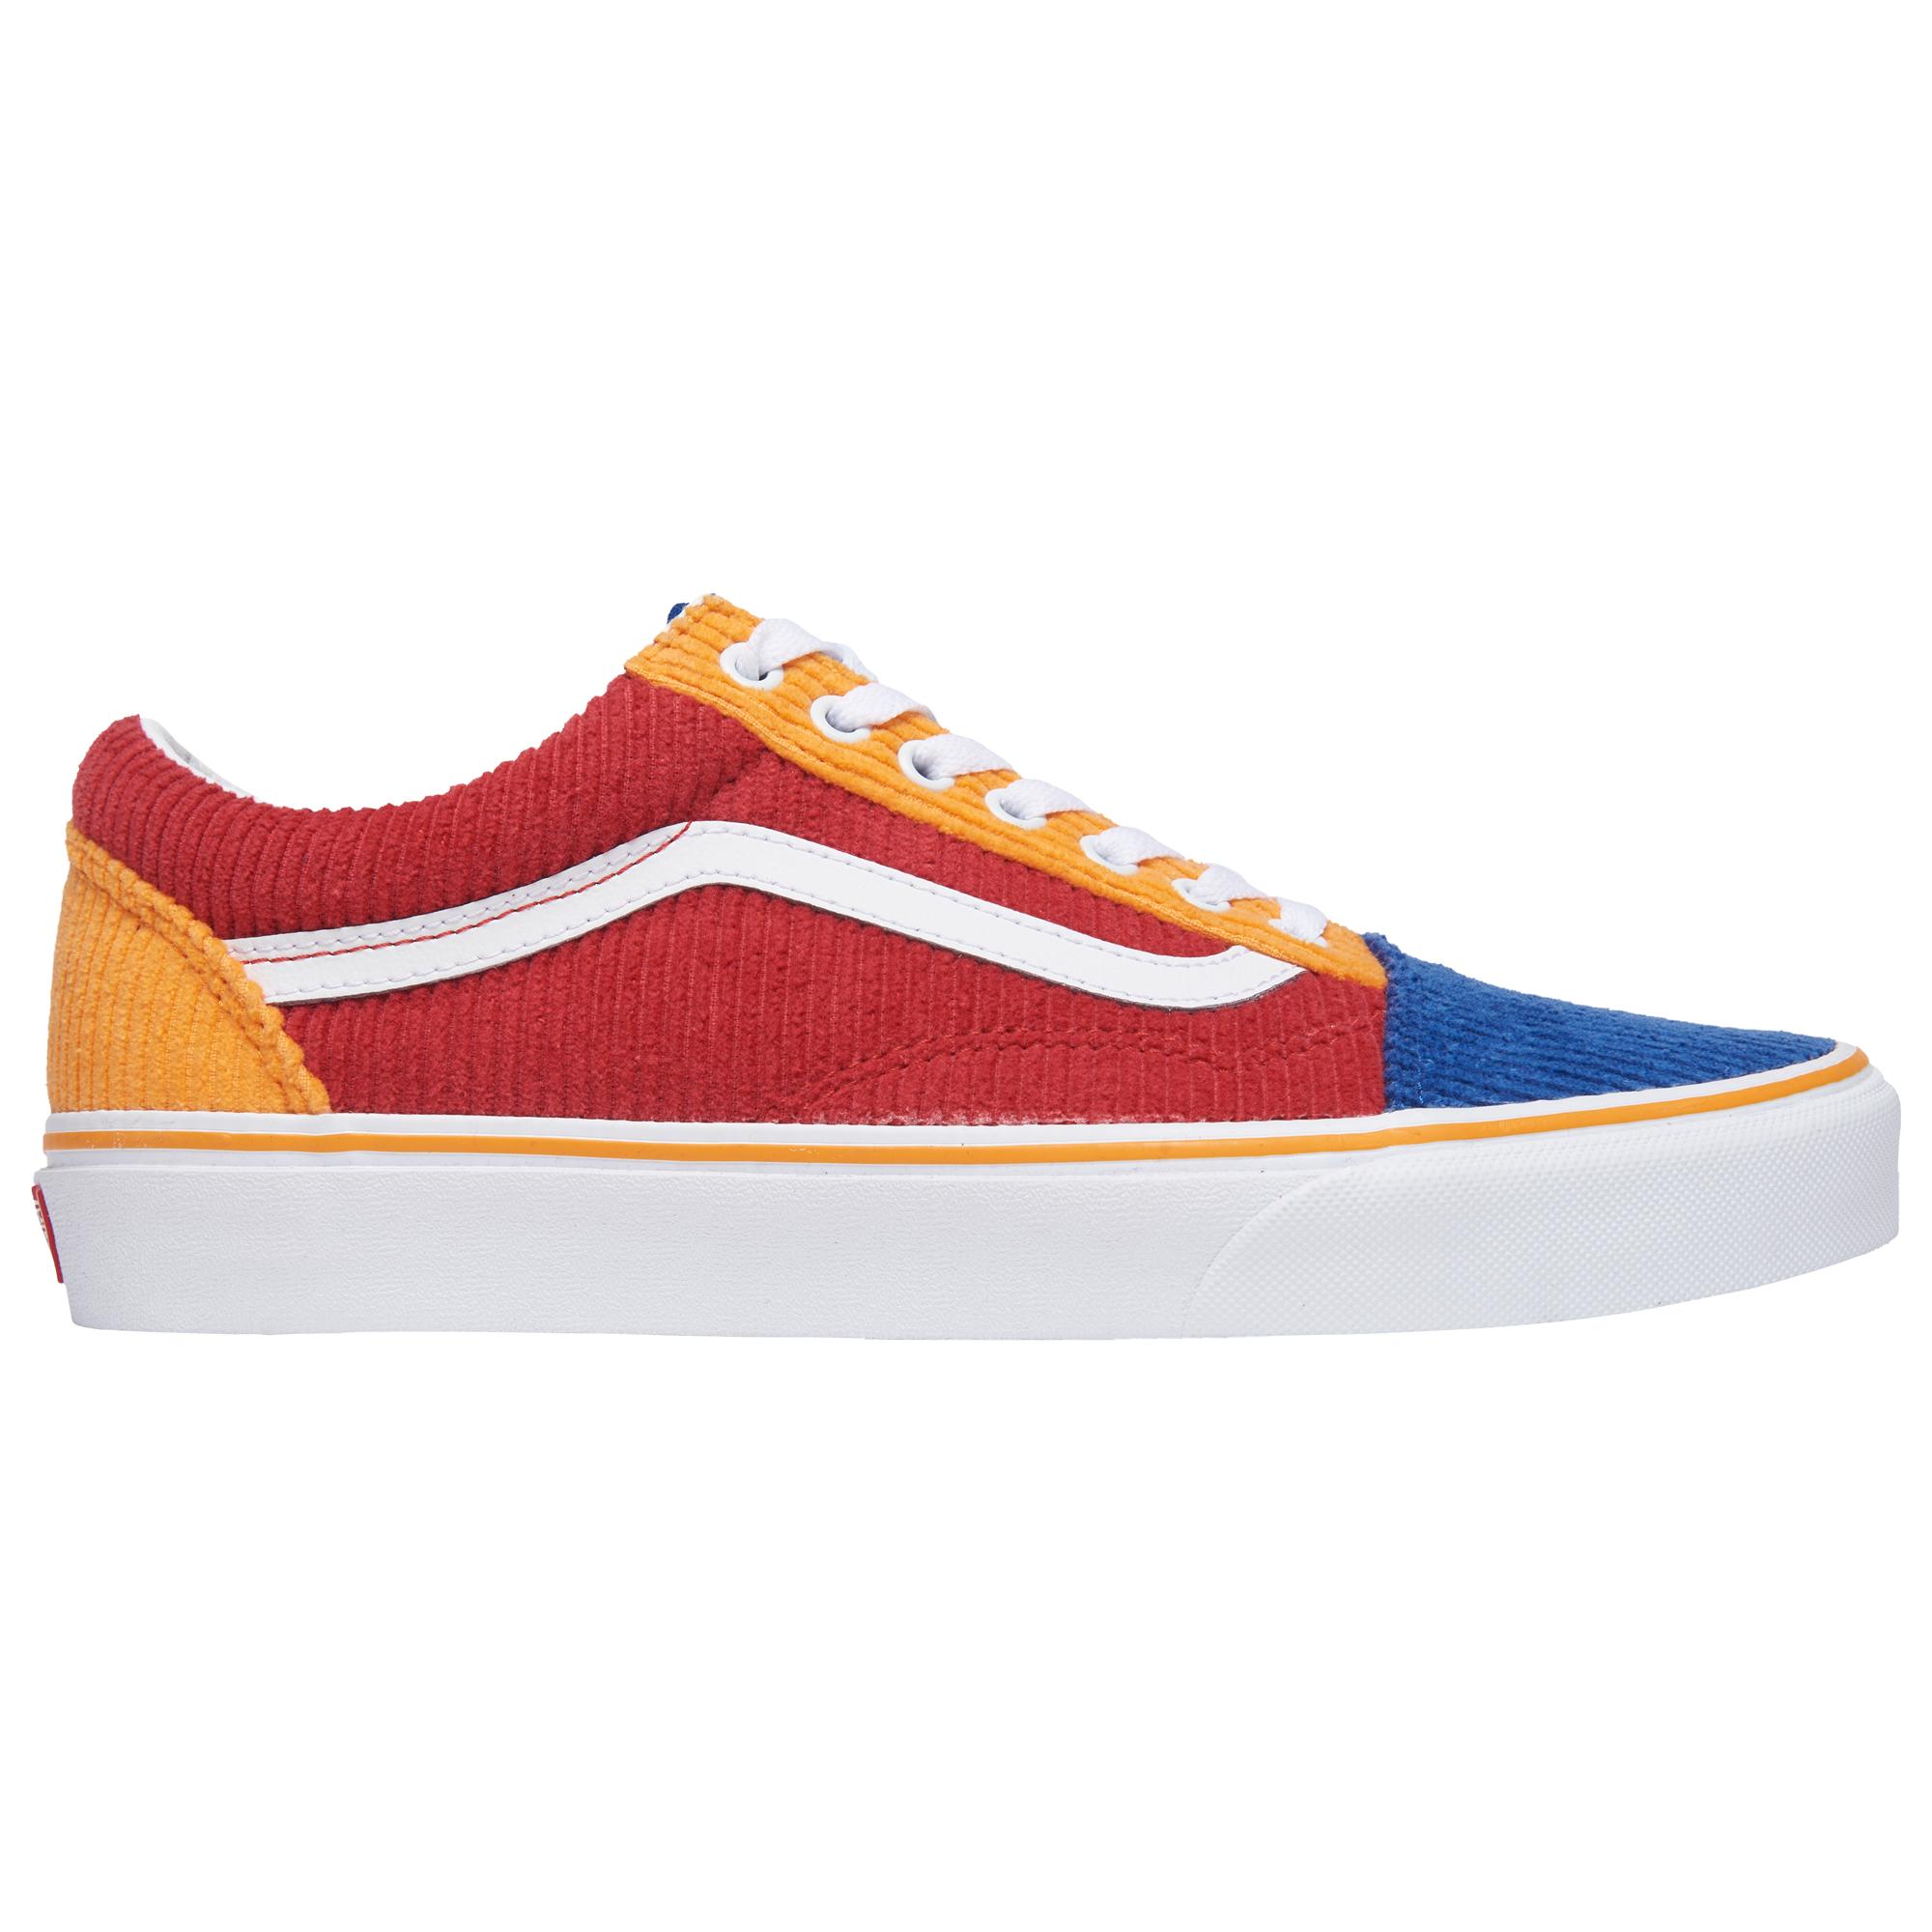 blue yellow and red vans